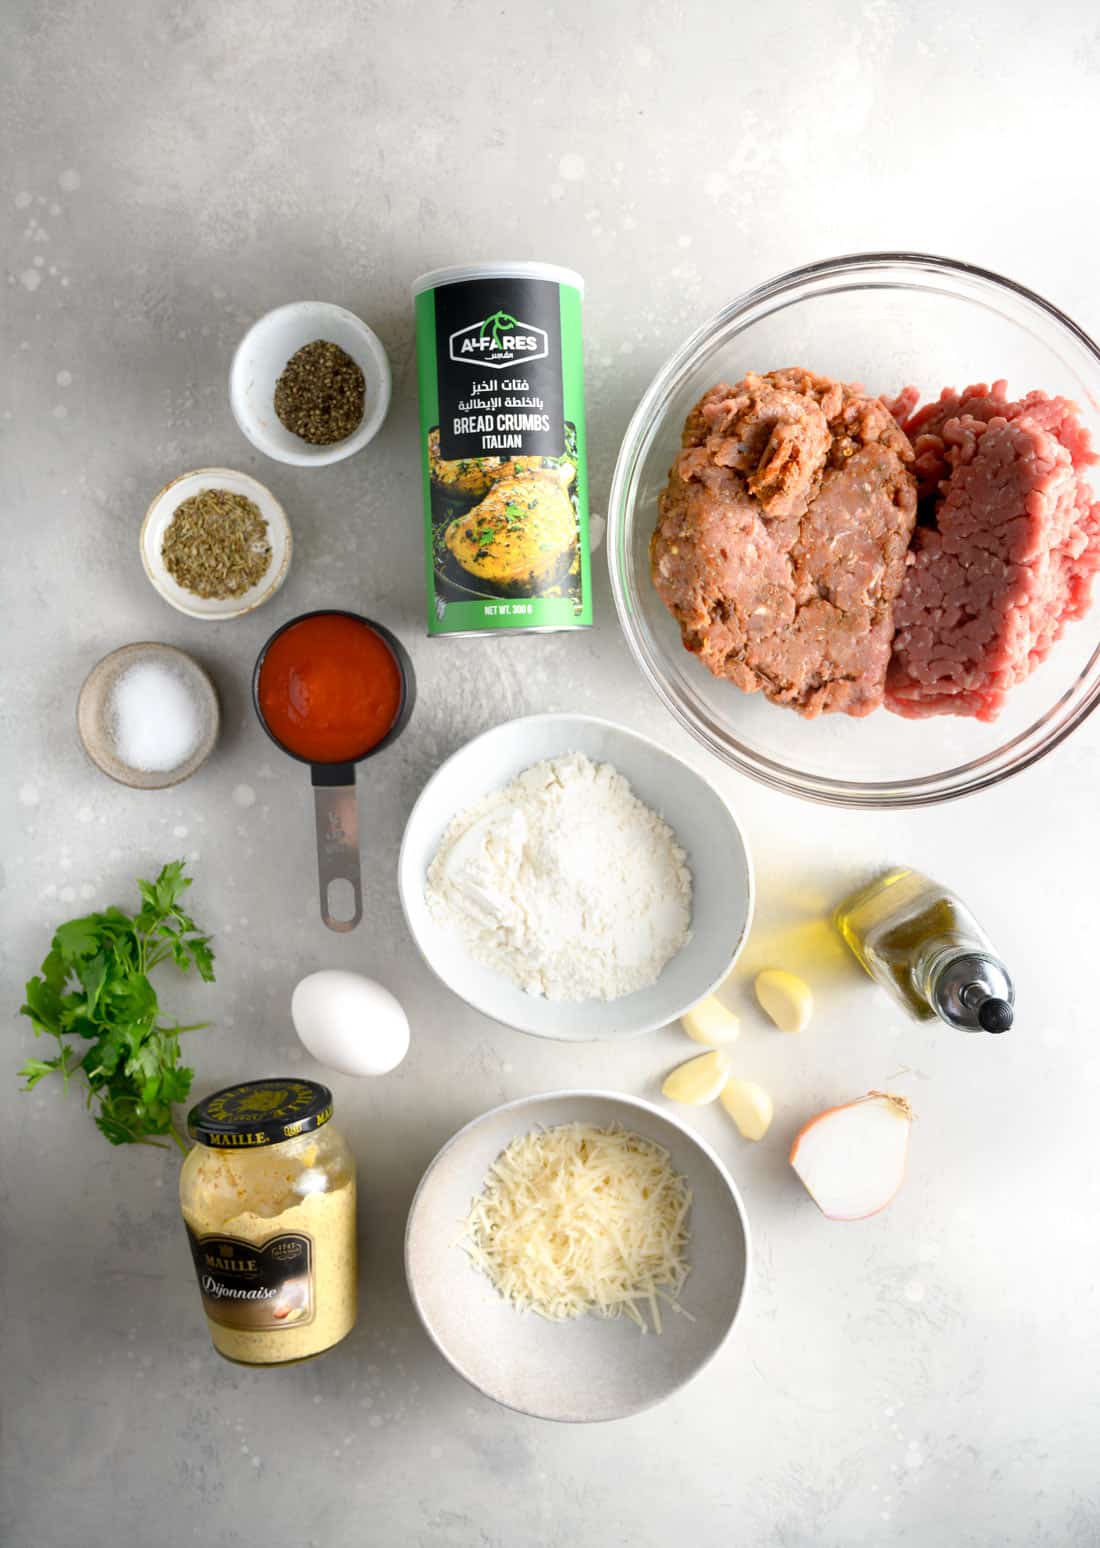 Spaghetti and Meatballs Recipe ingredients